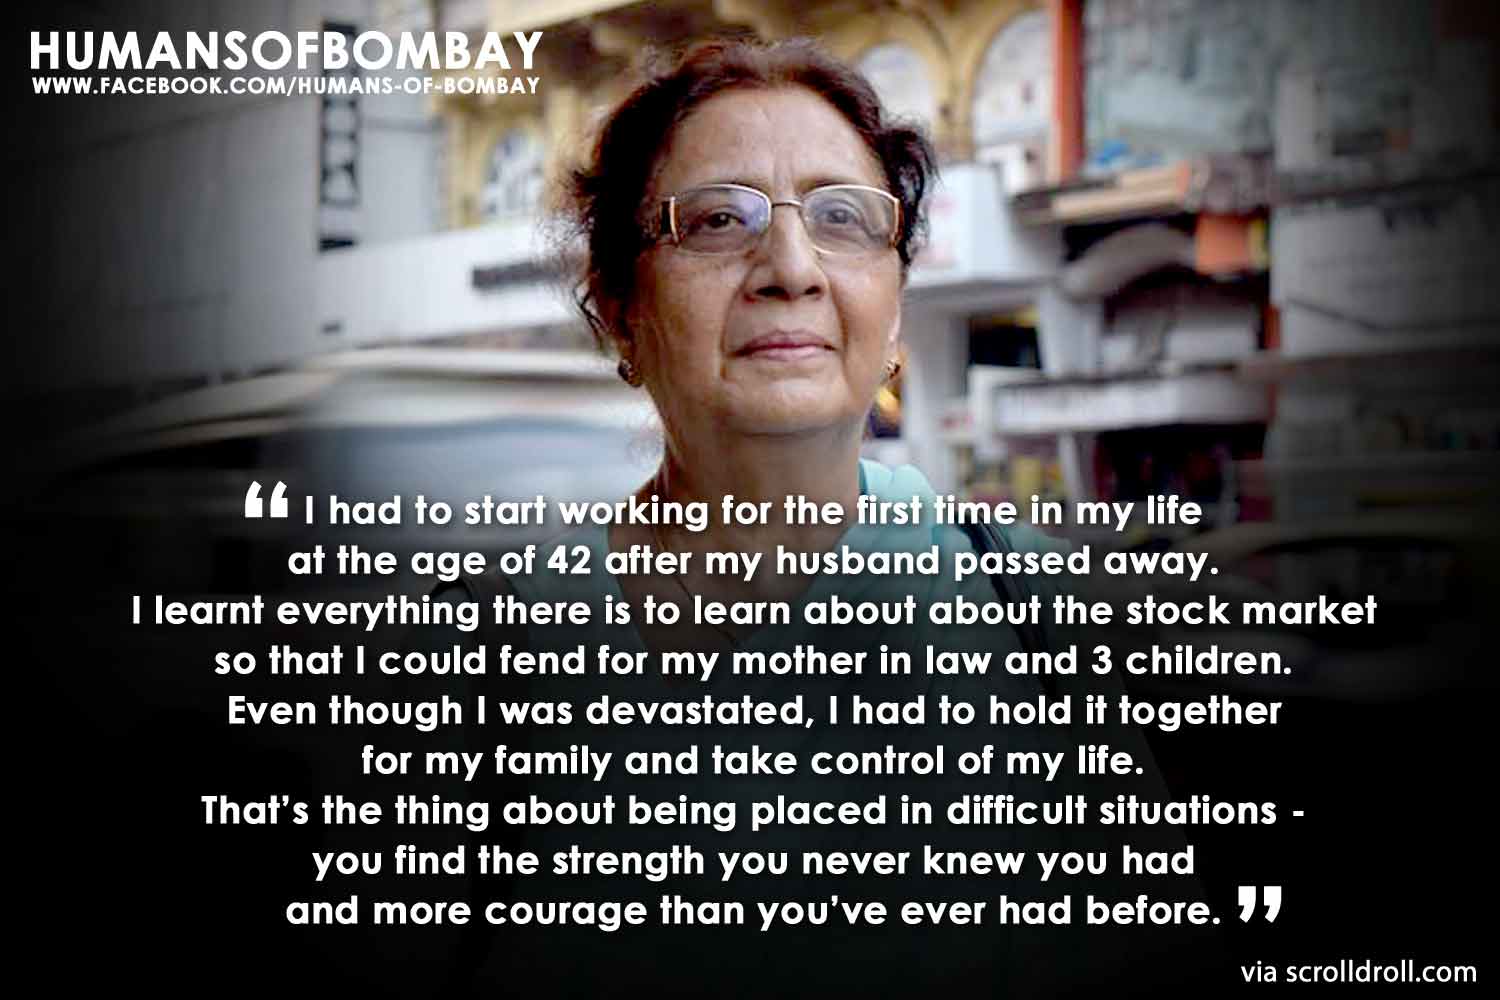 Humans of Bombay (5)